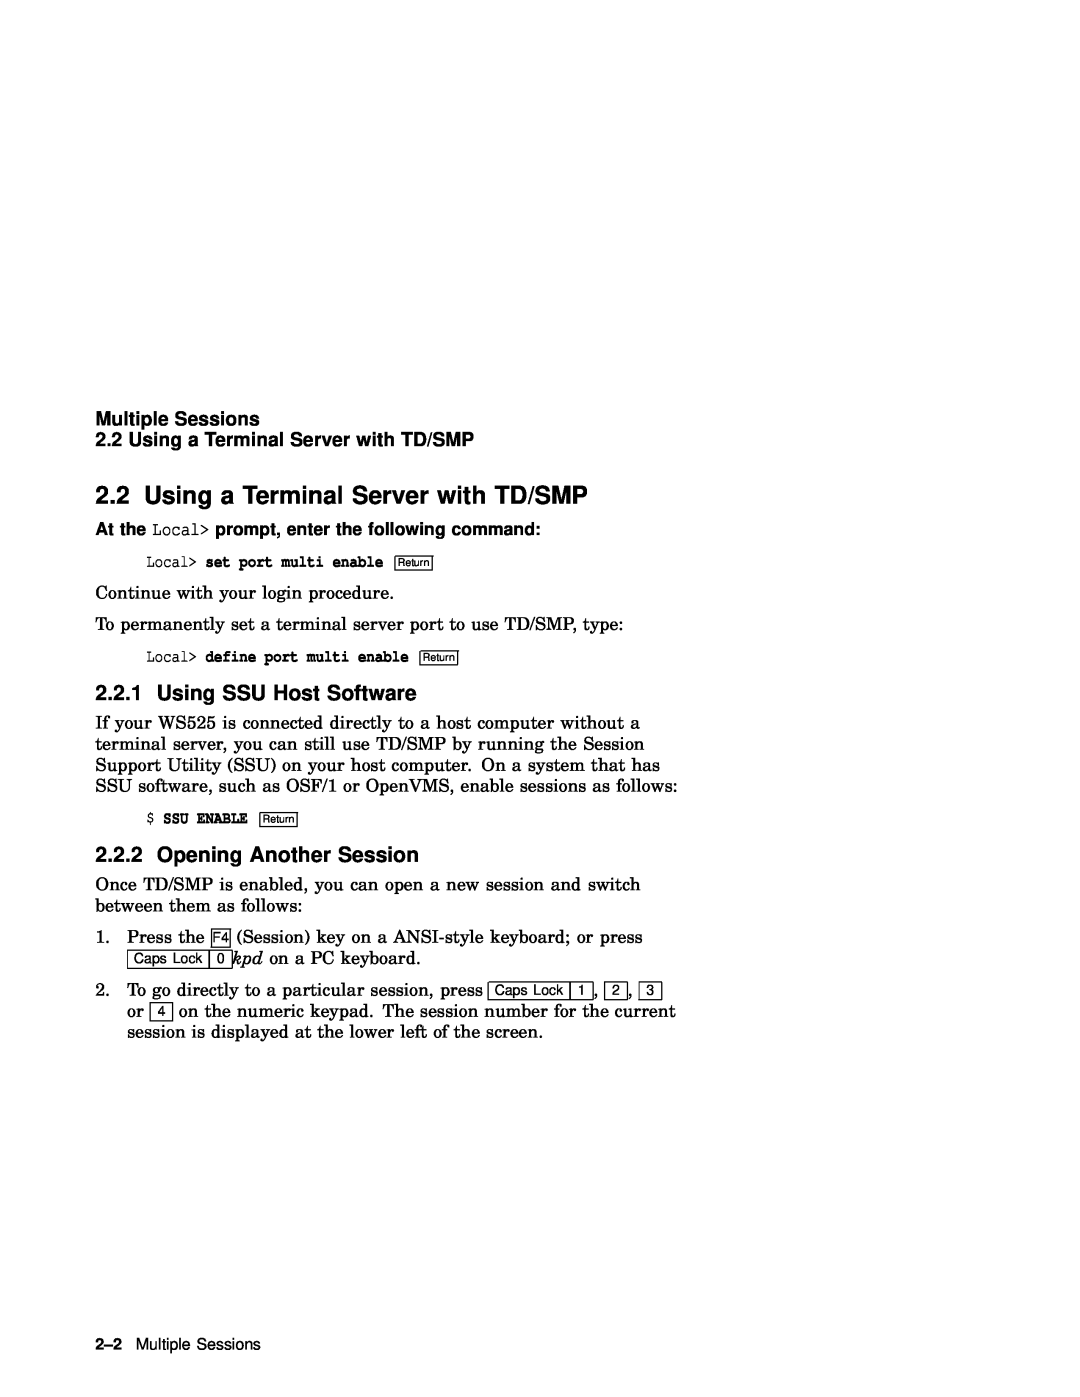 IBM WS525 manual Using a Terminal Server with TD/SMP, Using SSU Host Software, Opening Another Session 